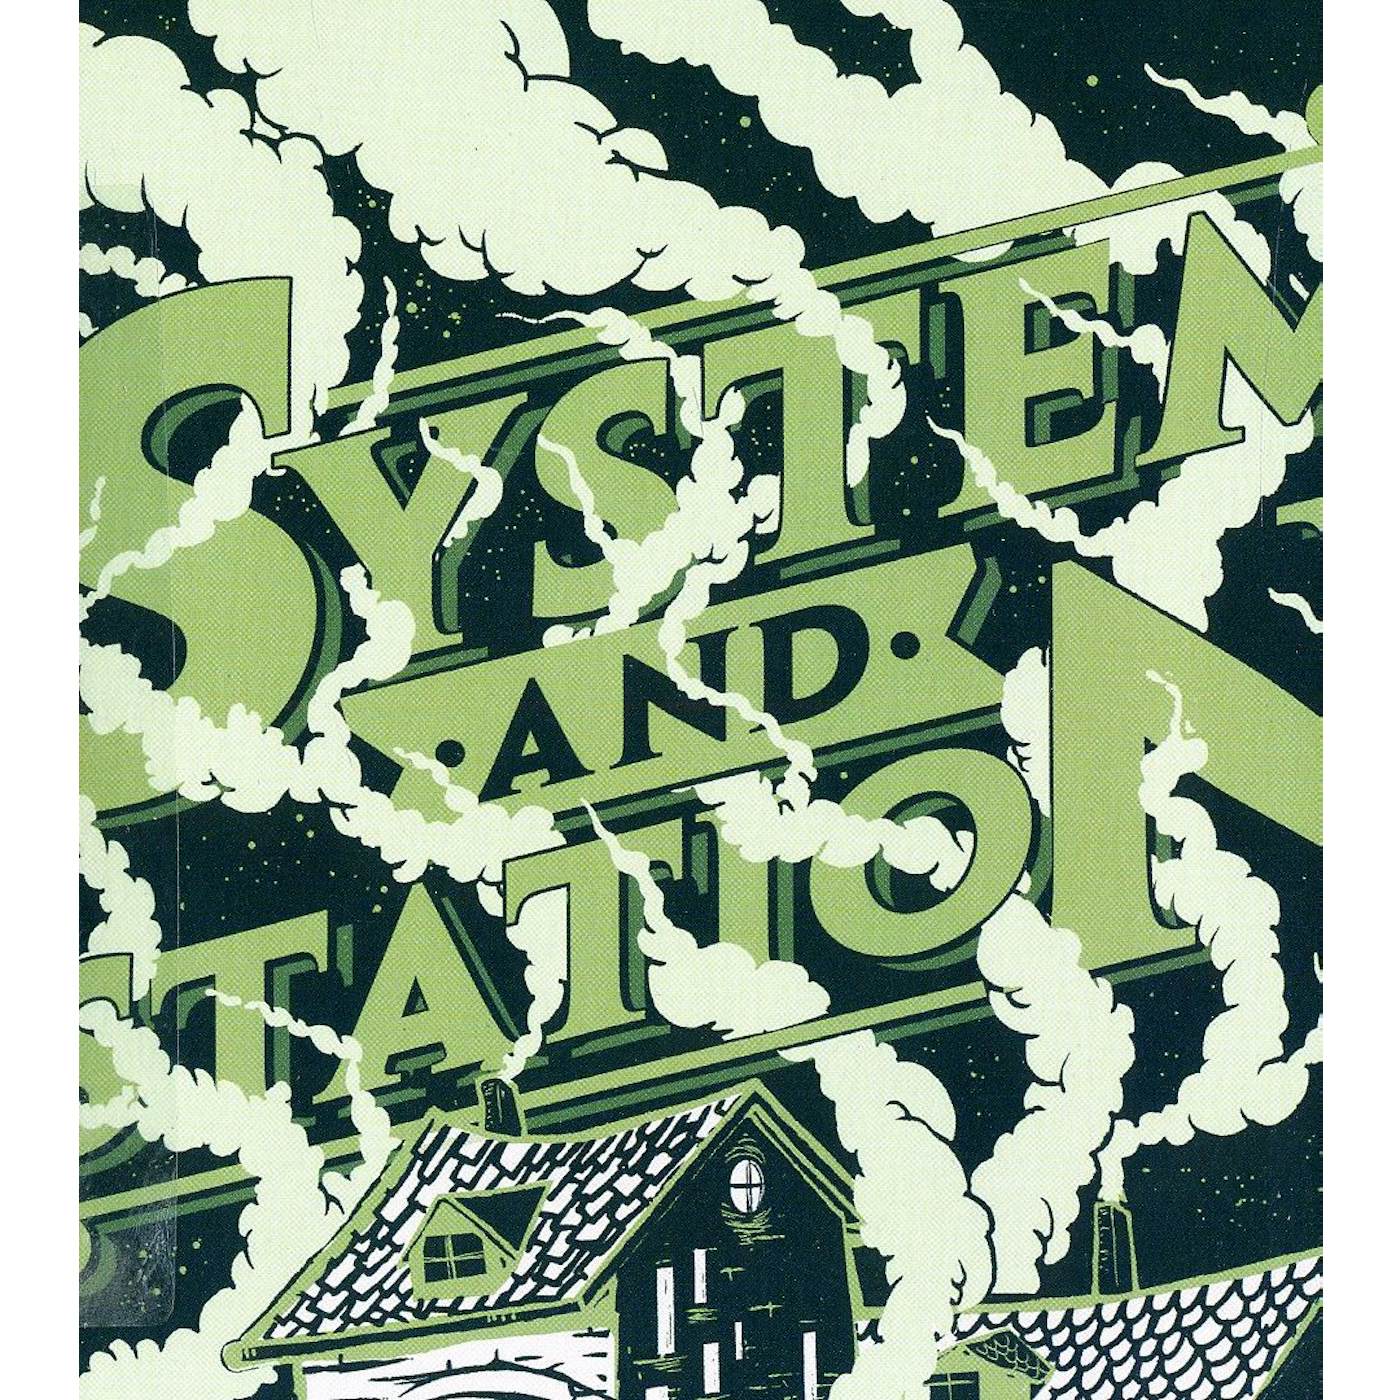 System and Station LIVE AT THE KNIFE SHOP DVD